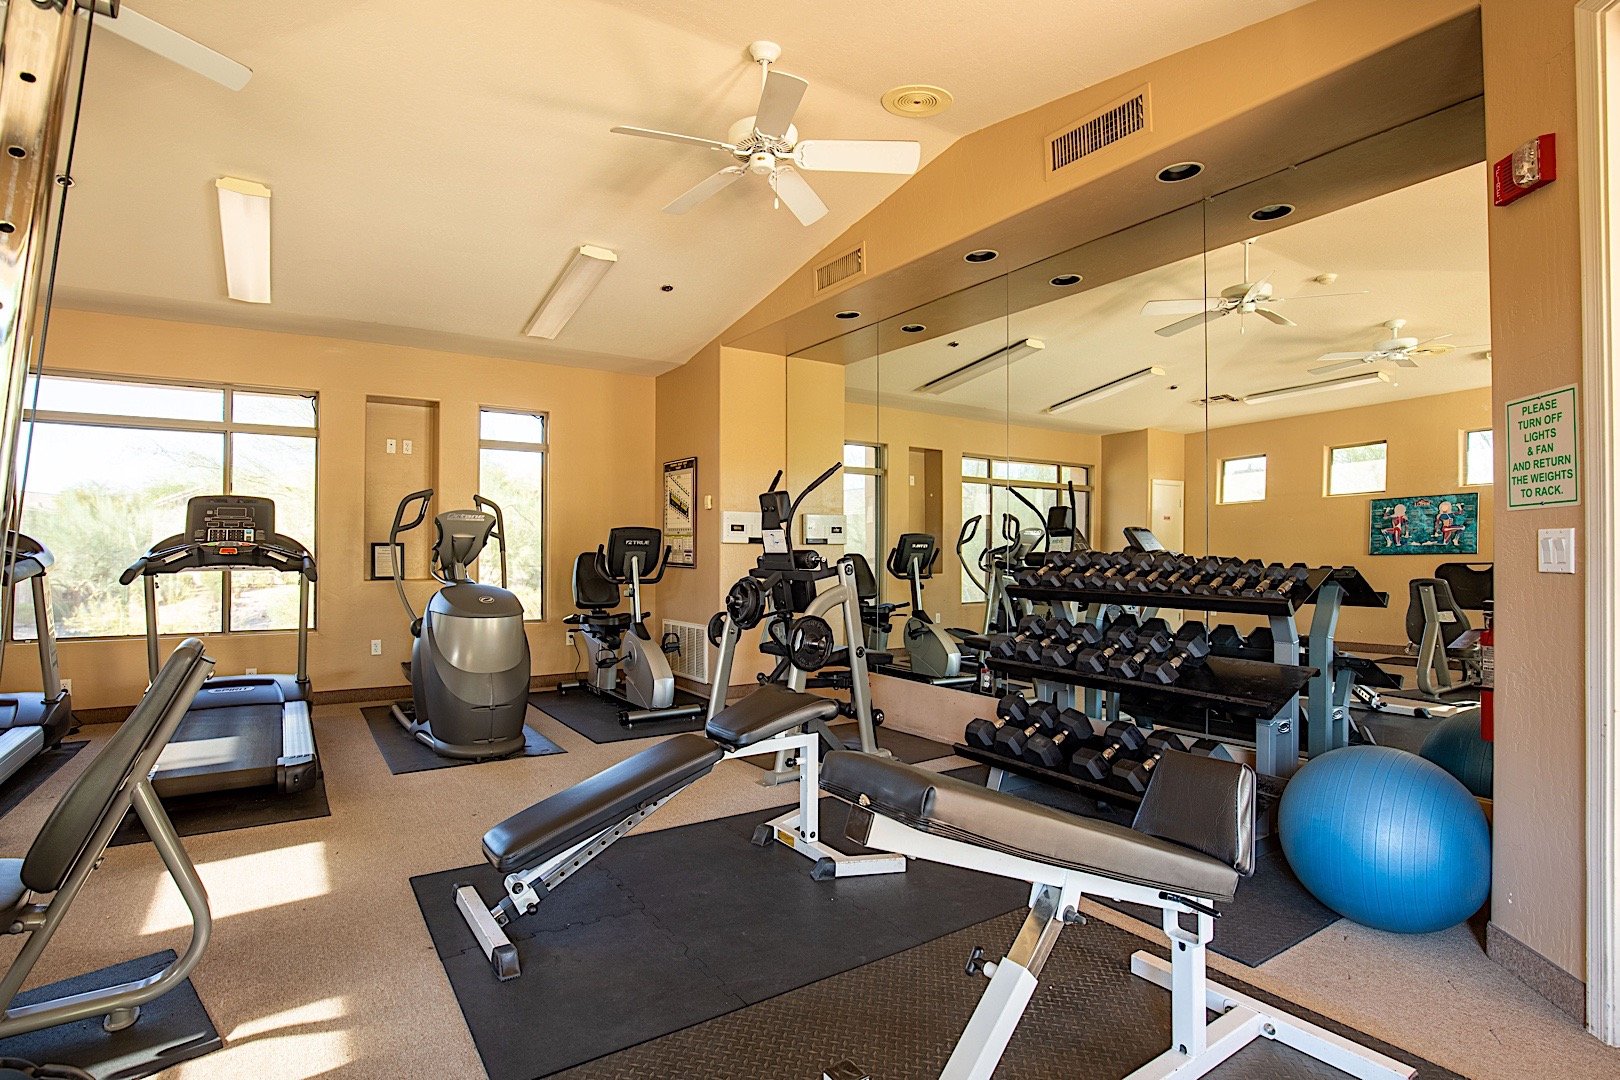 Cardio equipment and free weights